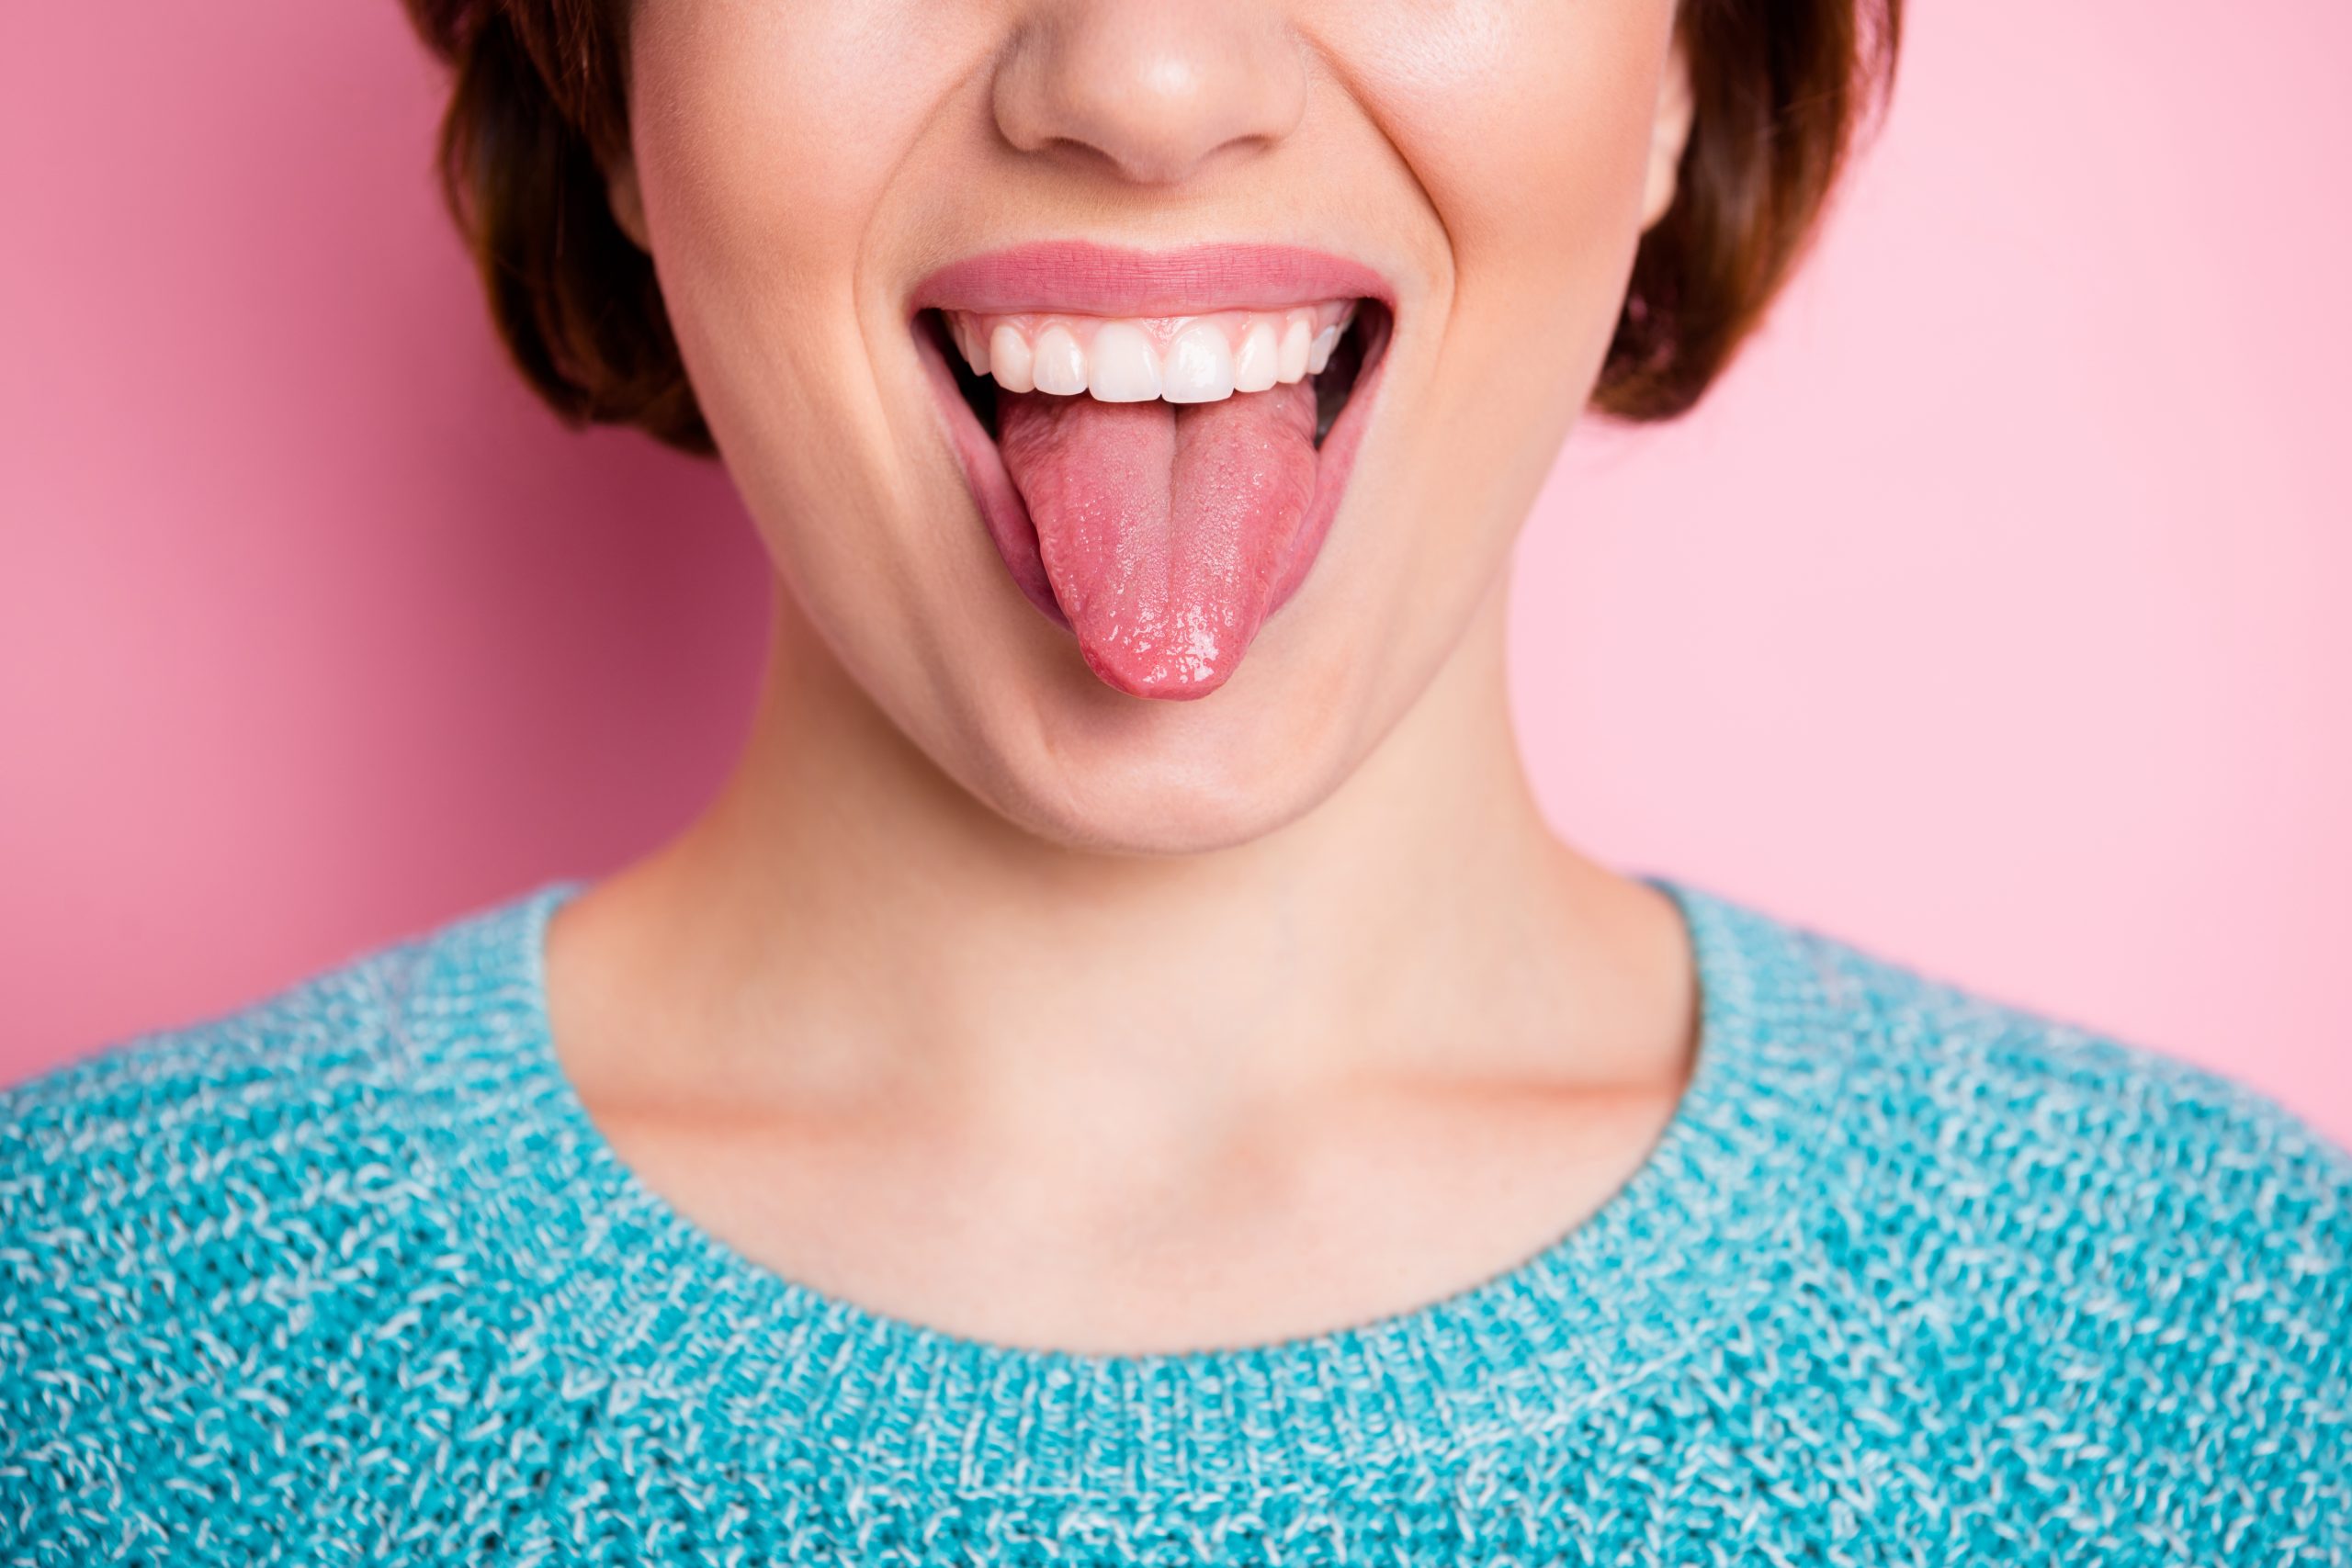 Cropped close-up view portrait of her she nice attractive crazy cheerful cheery, woman showing tongue grimacing healthy oral cavity isolated over pink pastel color background